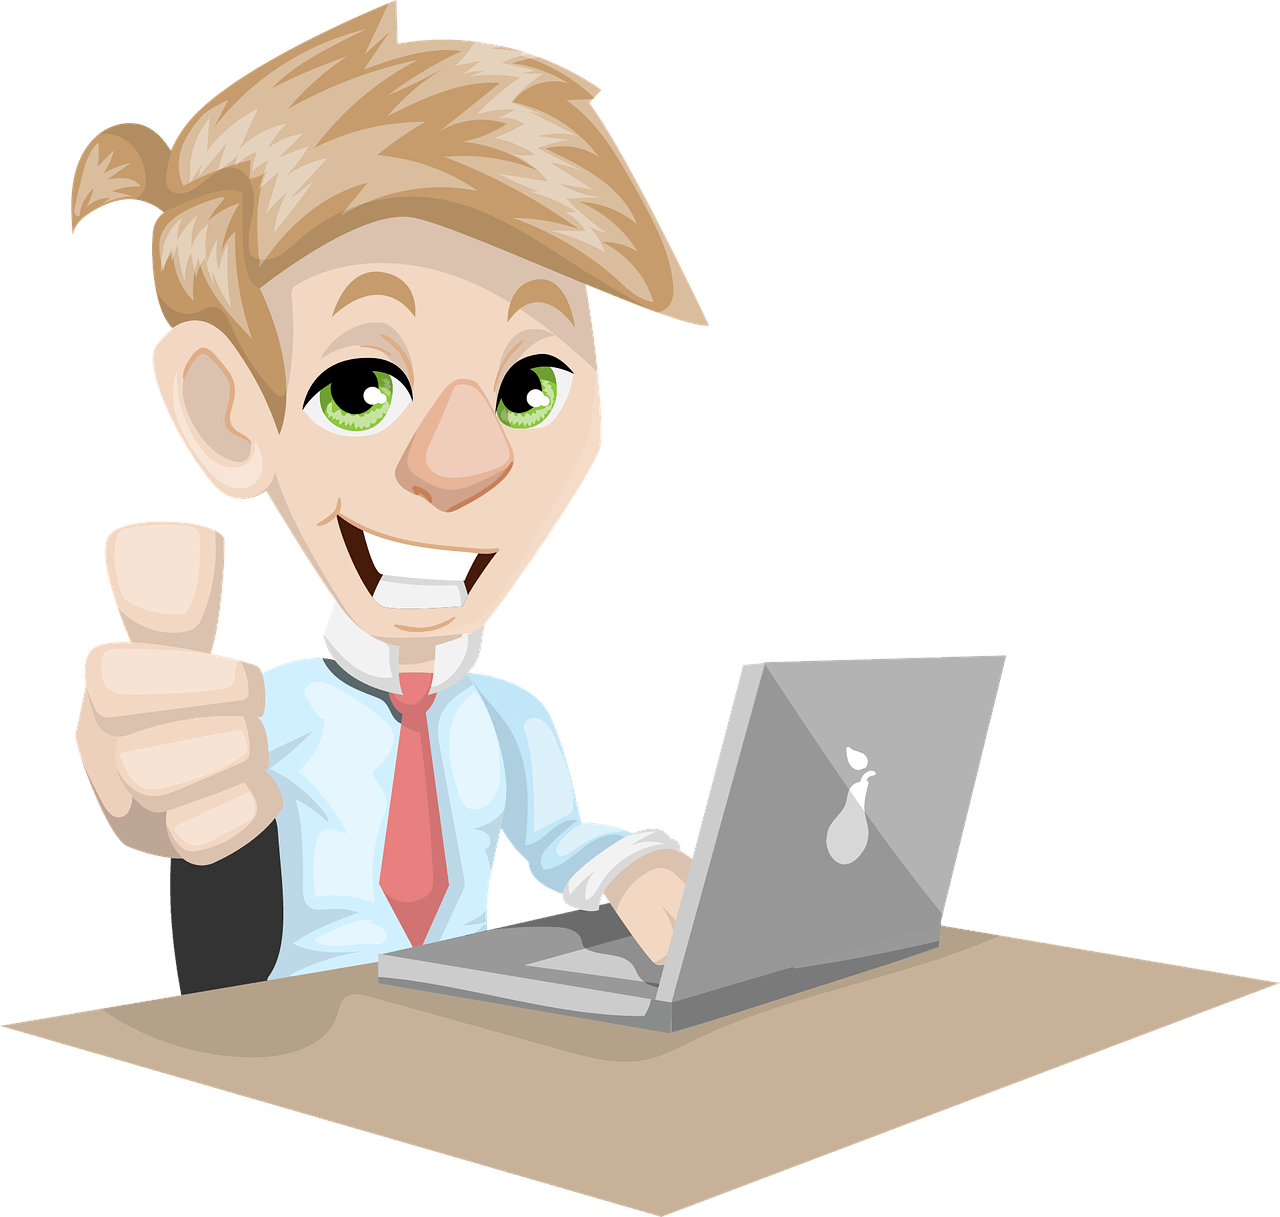 A happy cartoon business man smiling with a thumbs up on one hand and the other on his laptop keyboard